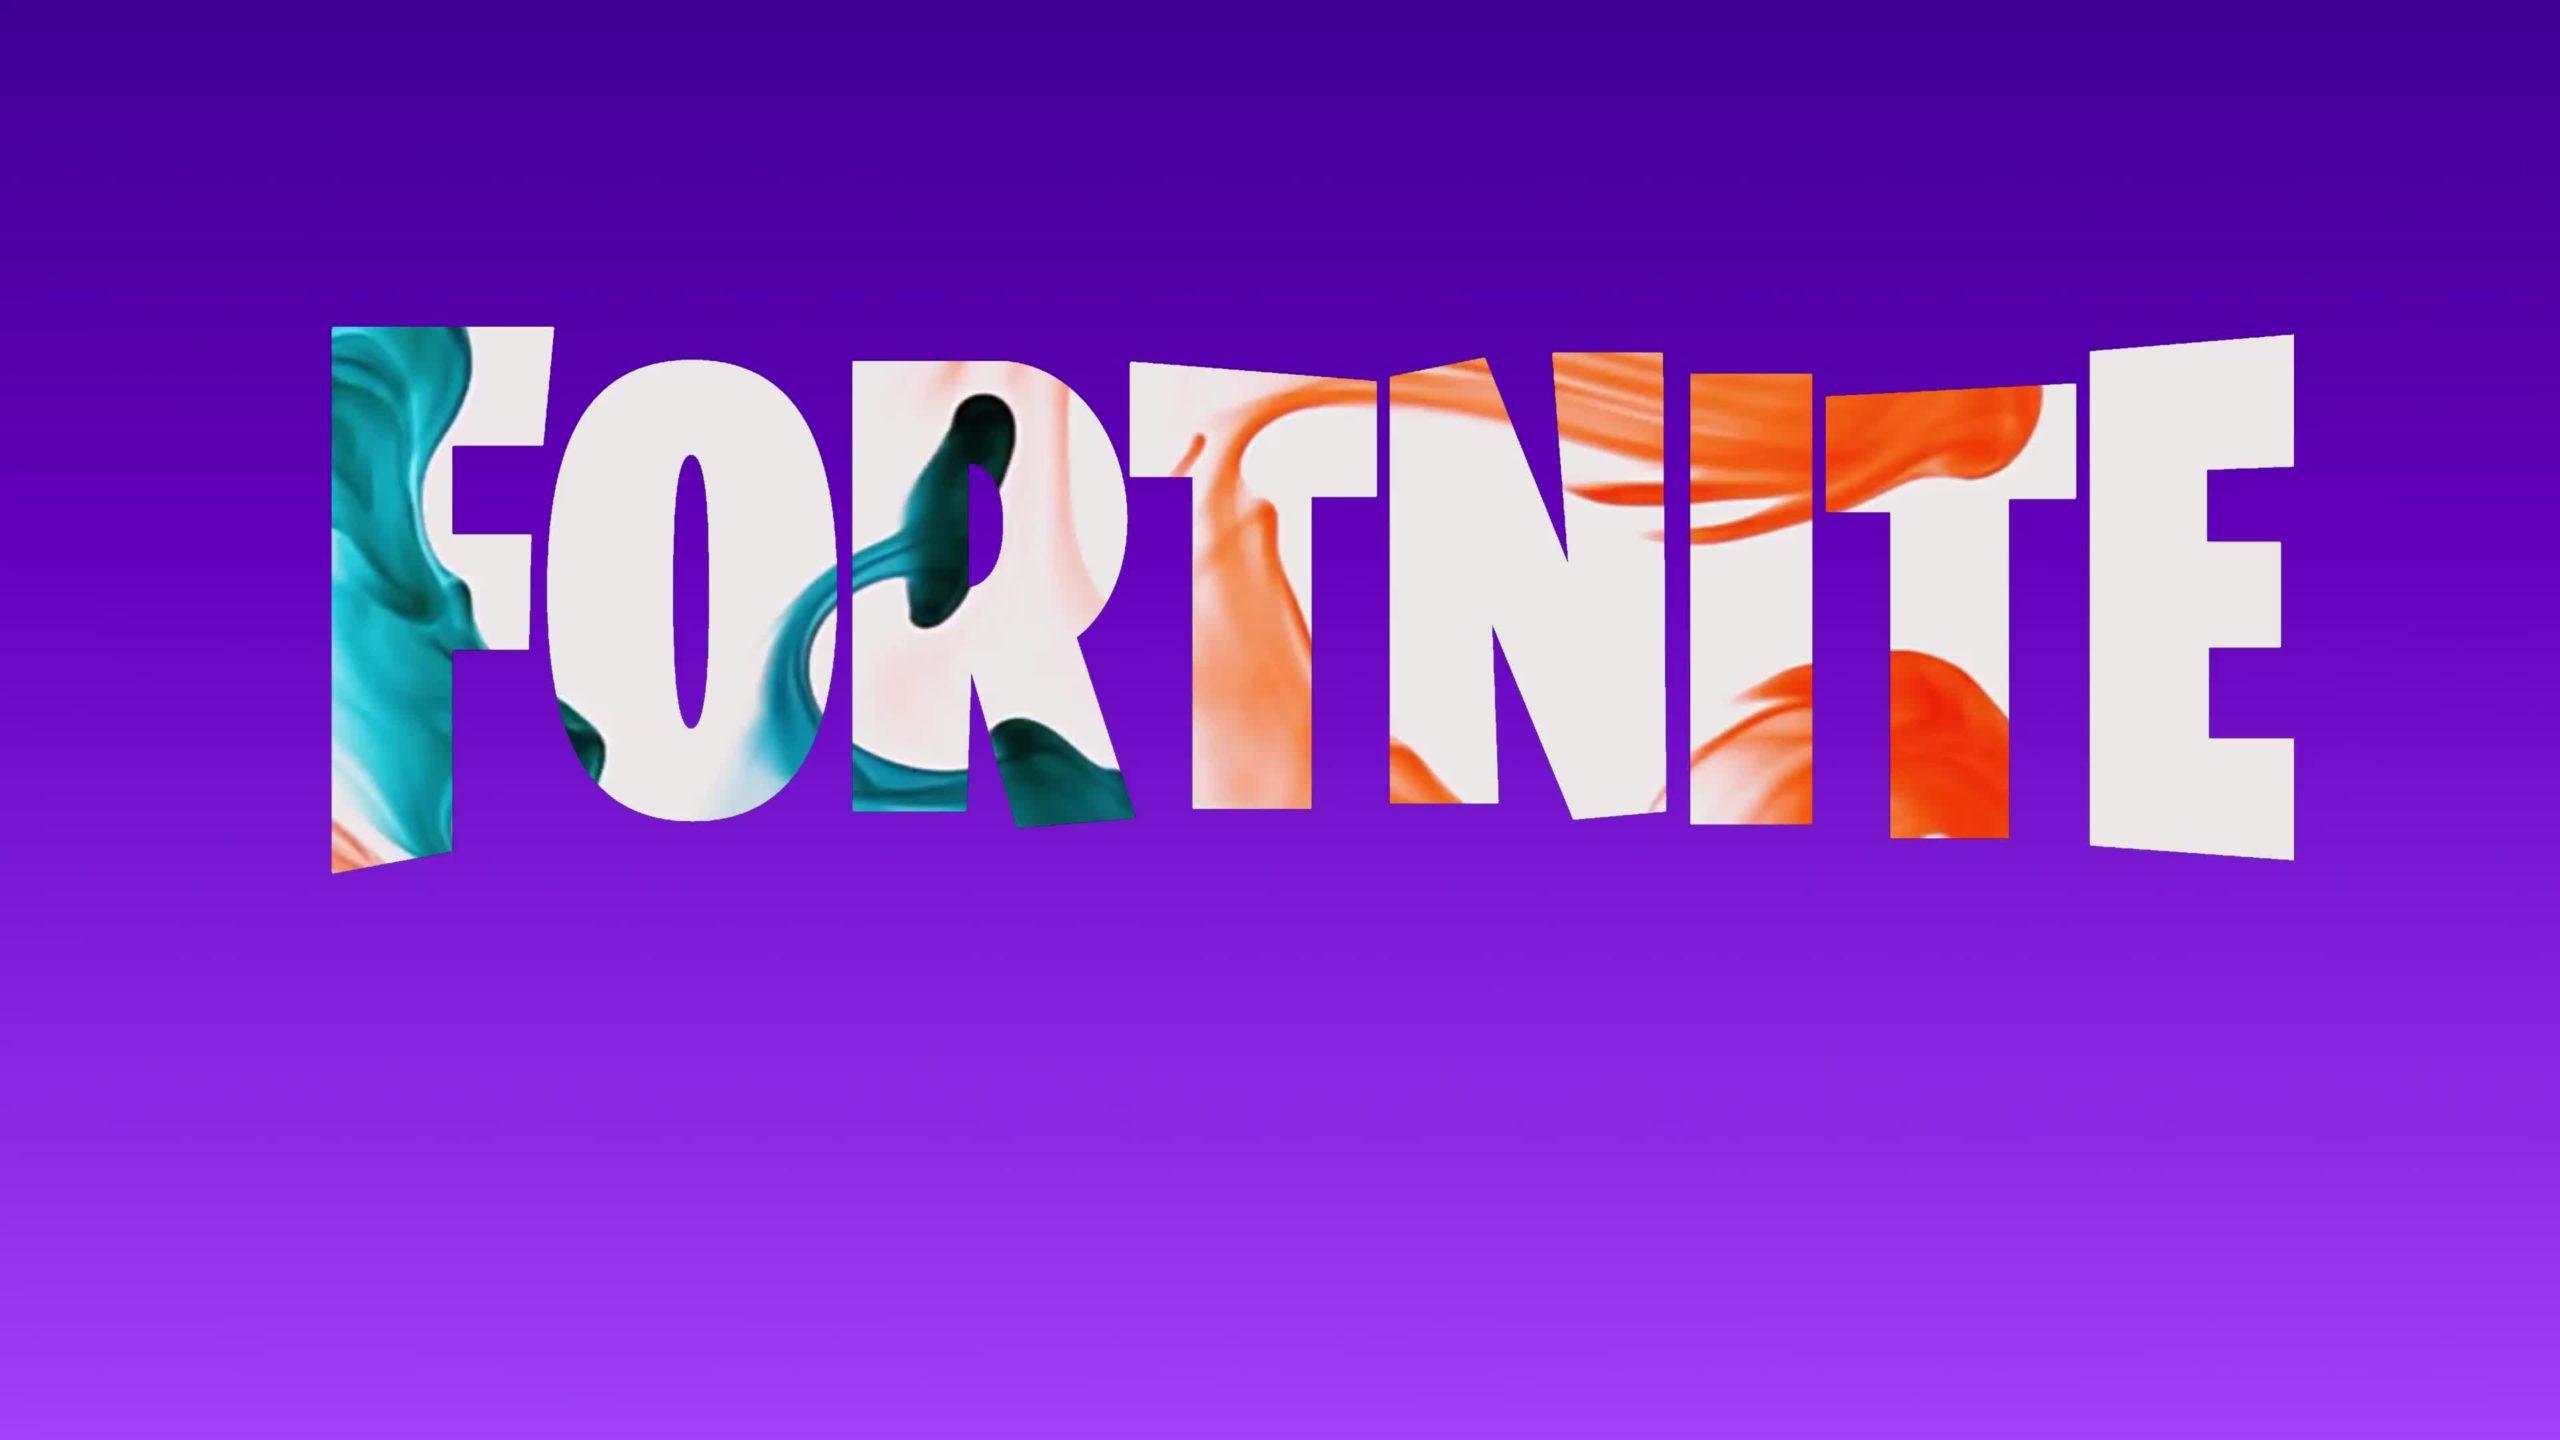 Cool Fortnite Logo Wallpapers Top Free Cool Fortnite Logo Backgrounds 